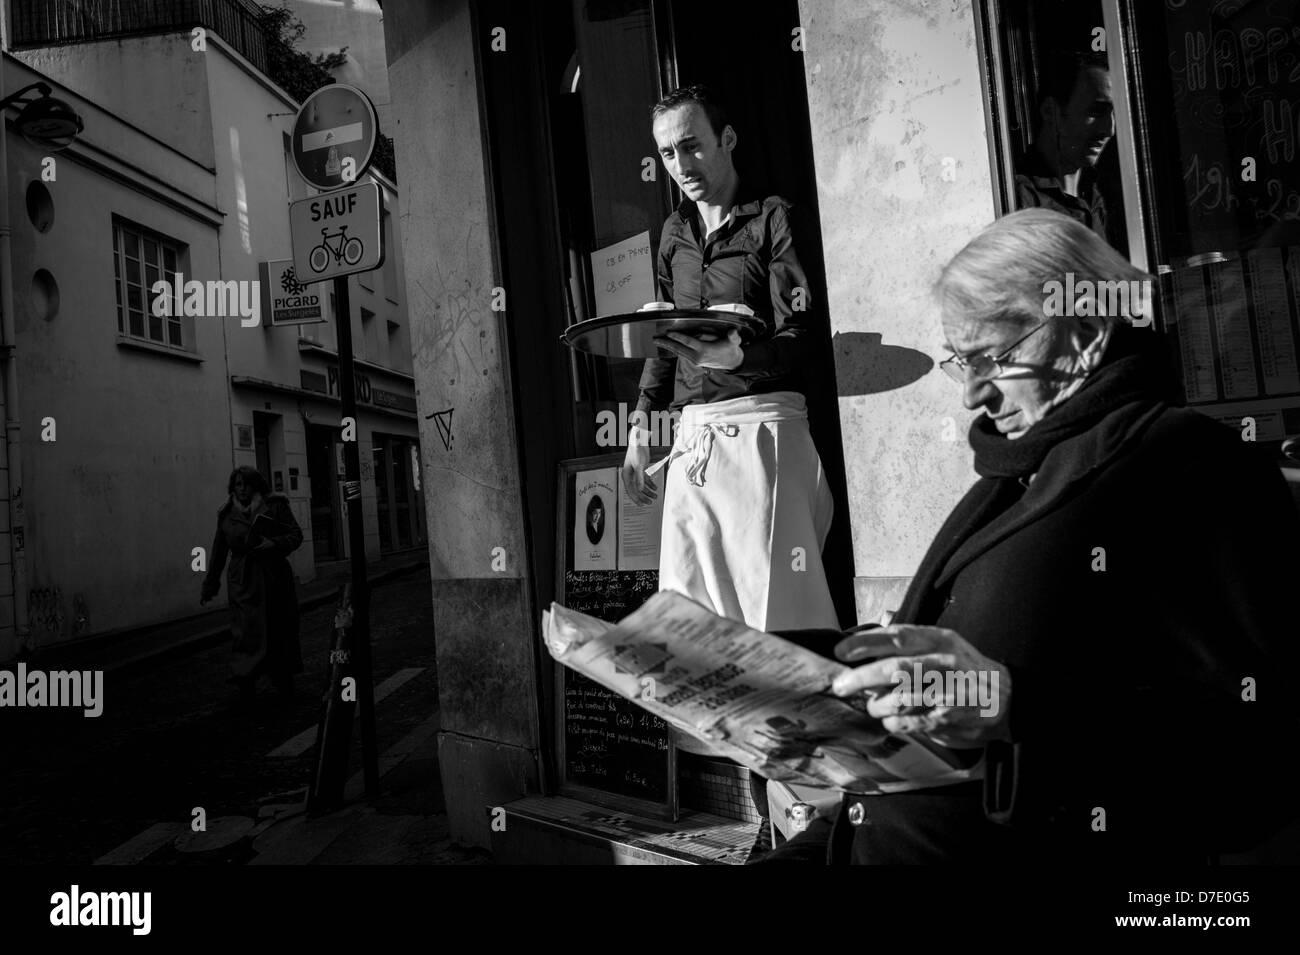 Man reading newspaper as the waiter brings his coffee. Stock Photo